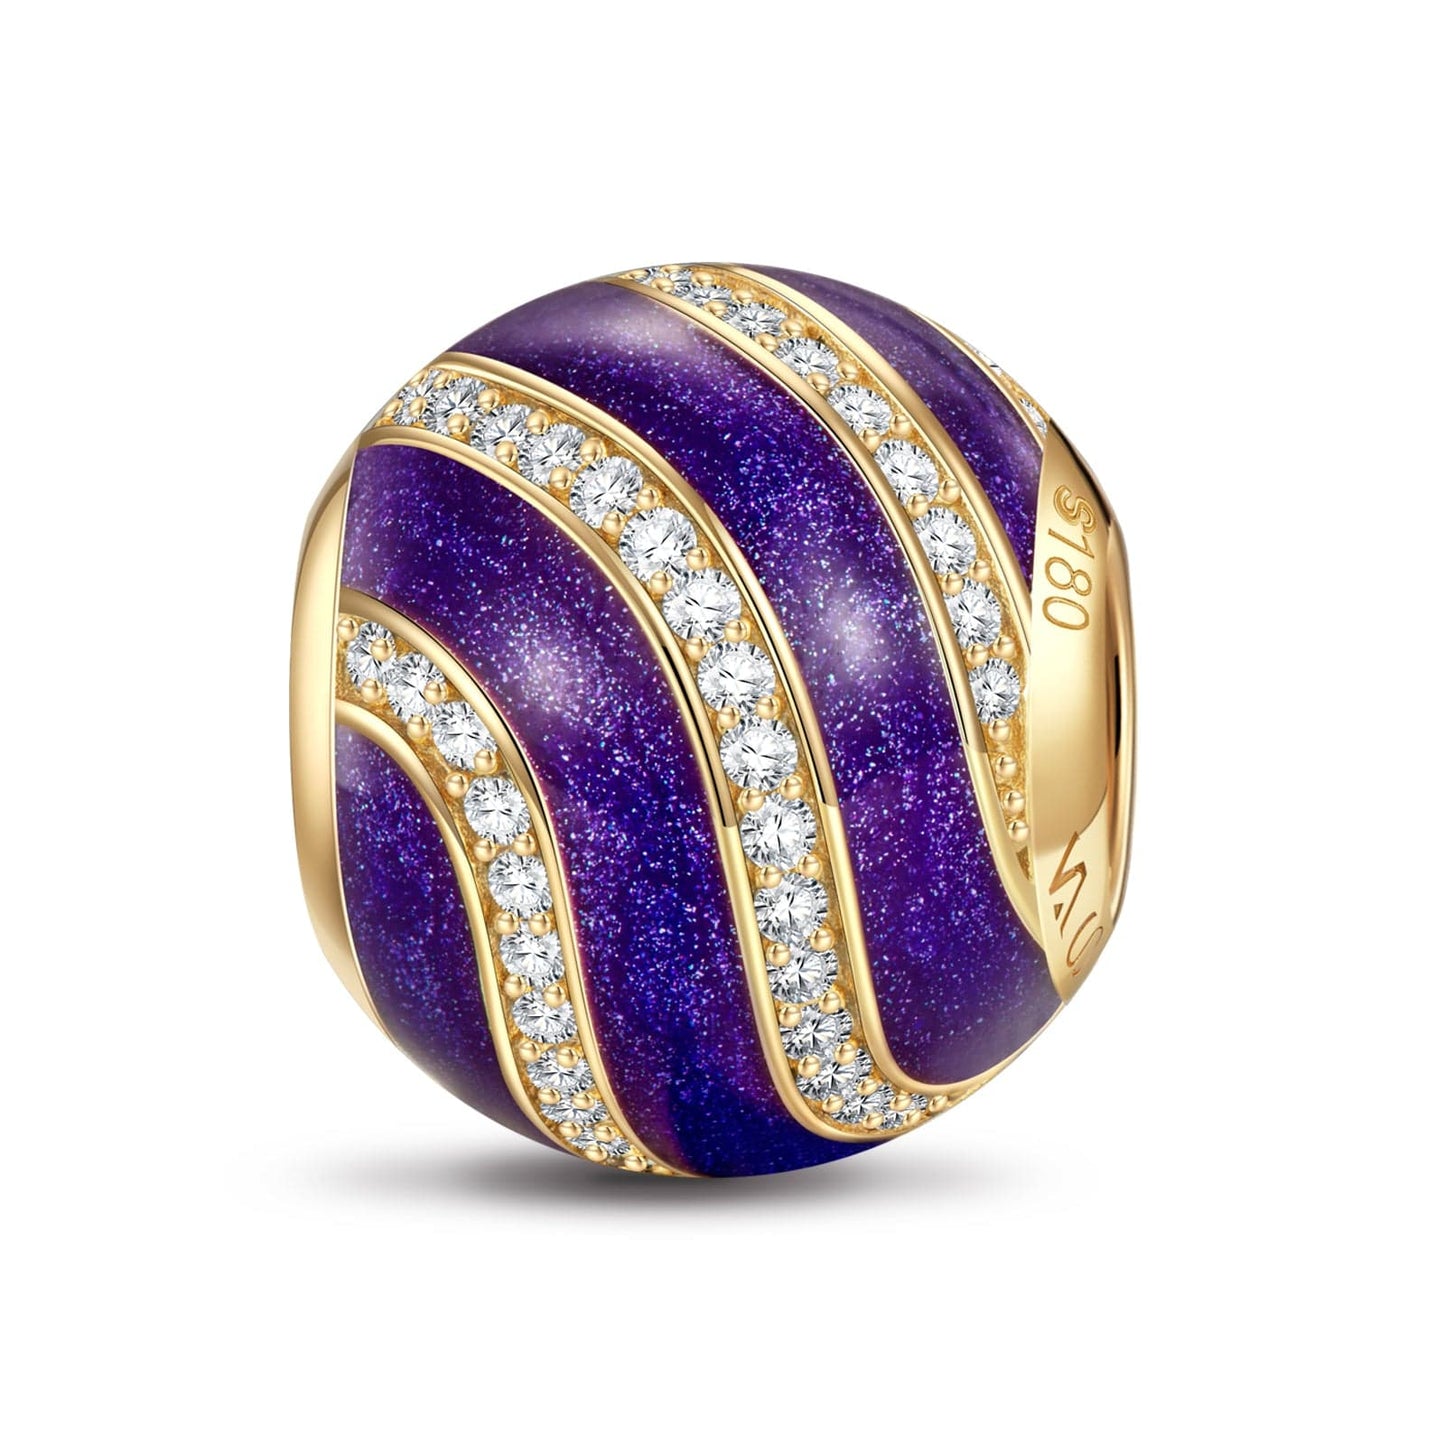 Ripples of Venice Tarnish-resistant Silver Charms With Enamel In 14K Gold Plated